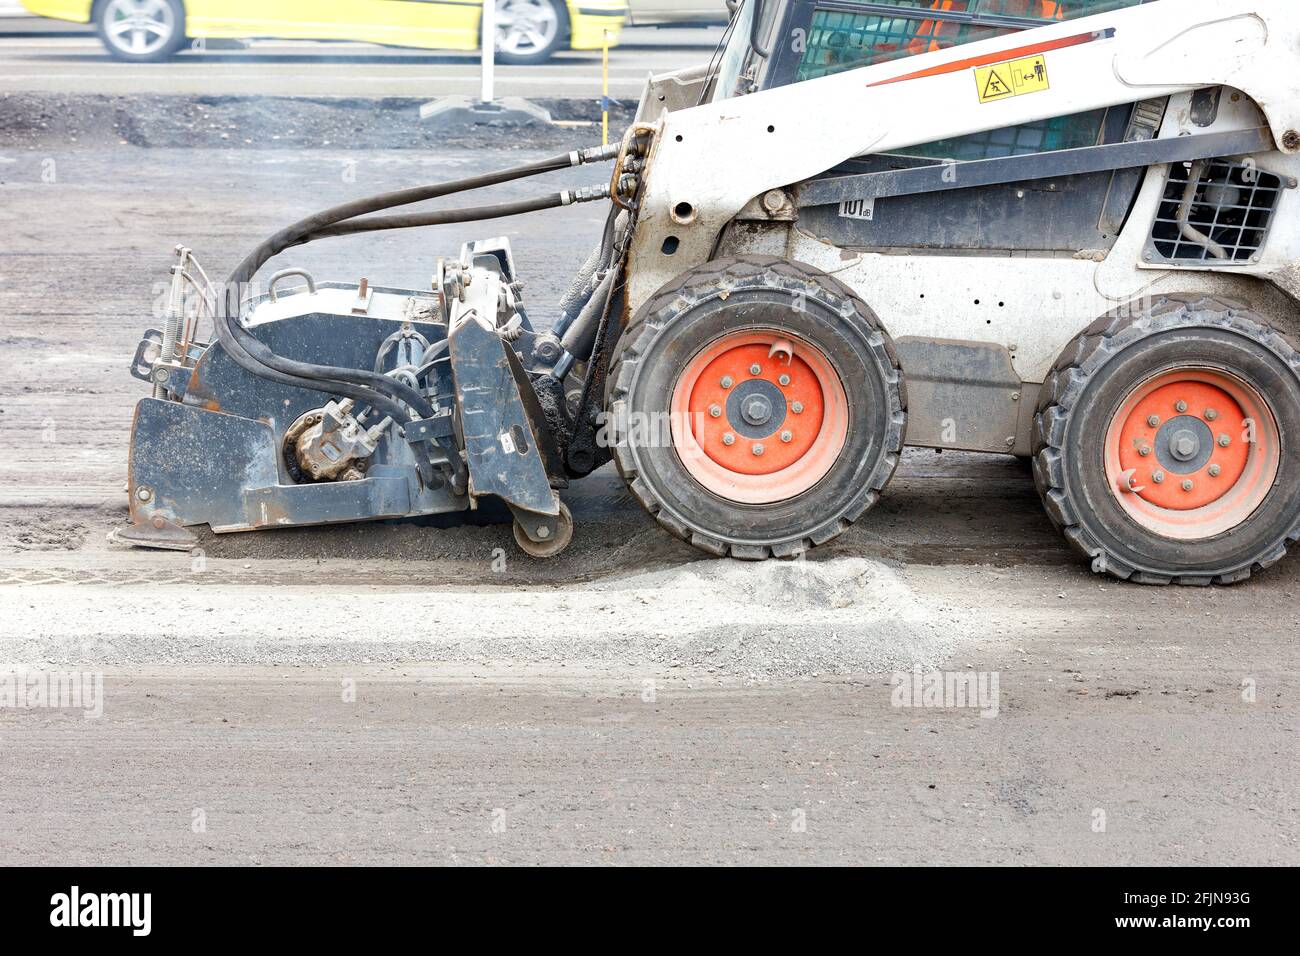 Compact road tractor with hydraulic road repair attachment destroys old asphalt before paving new one. Copy space. Stock Photo